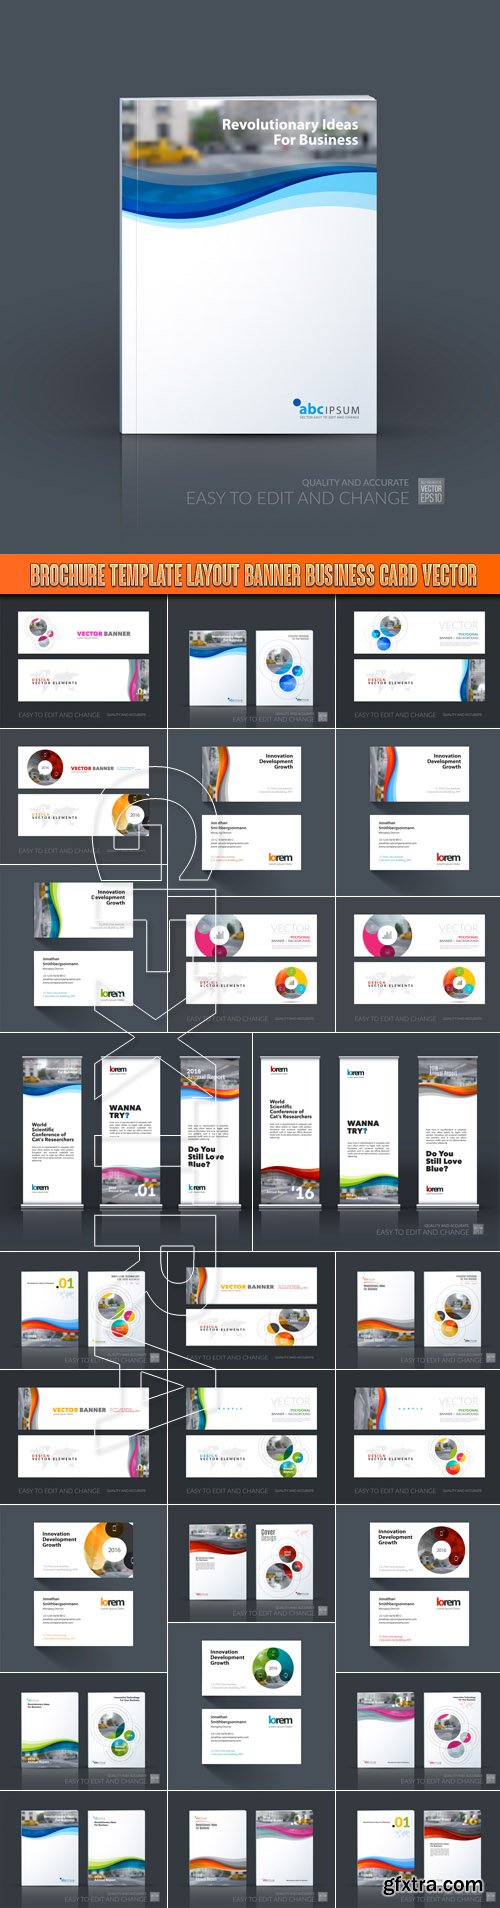 Brochure template layout banner business card vector